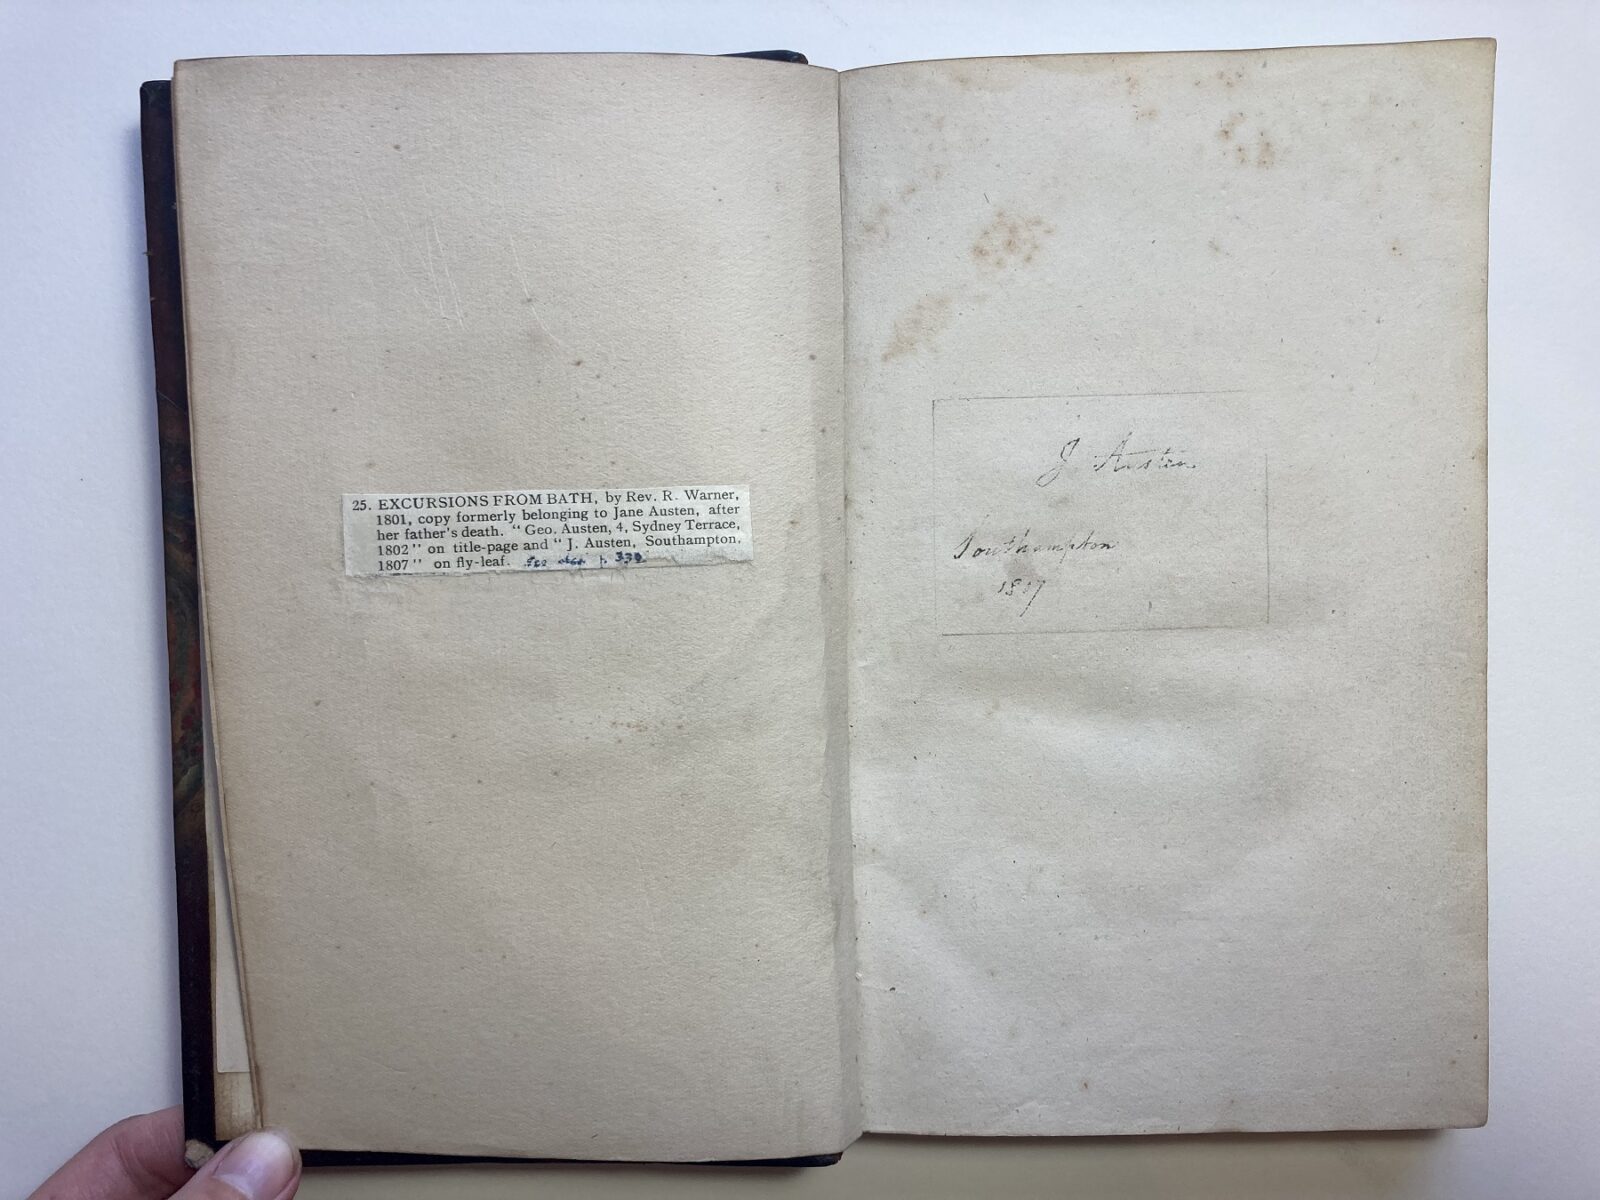 Inscription by Jane Austen on the fly leaf of 'Excursions from Bath'. It reads: J. Austen. Southampton 1807